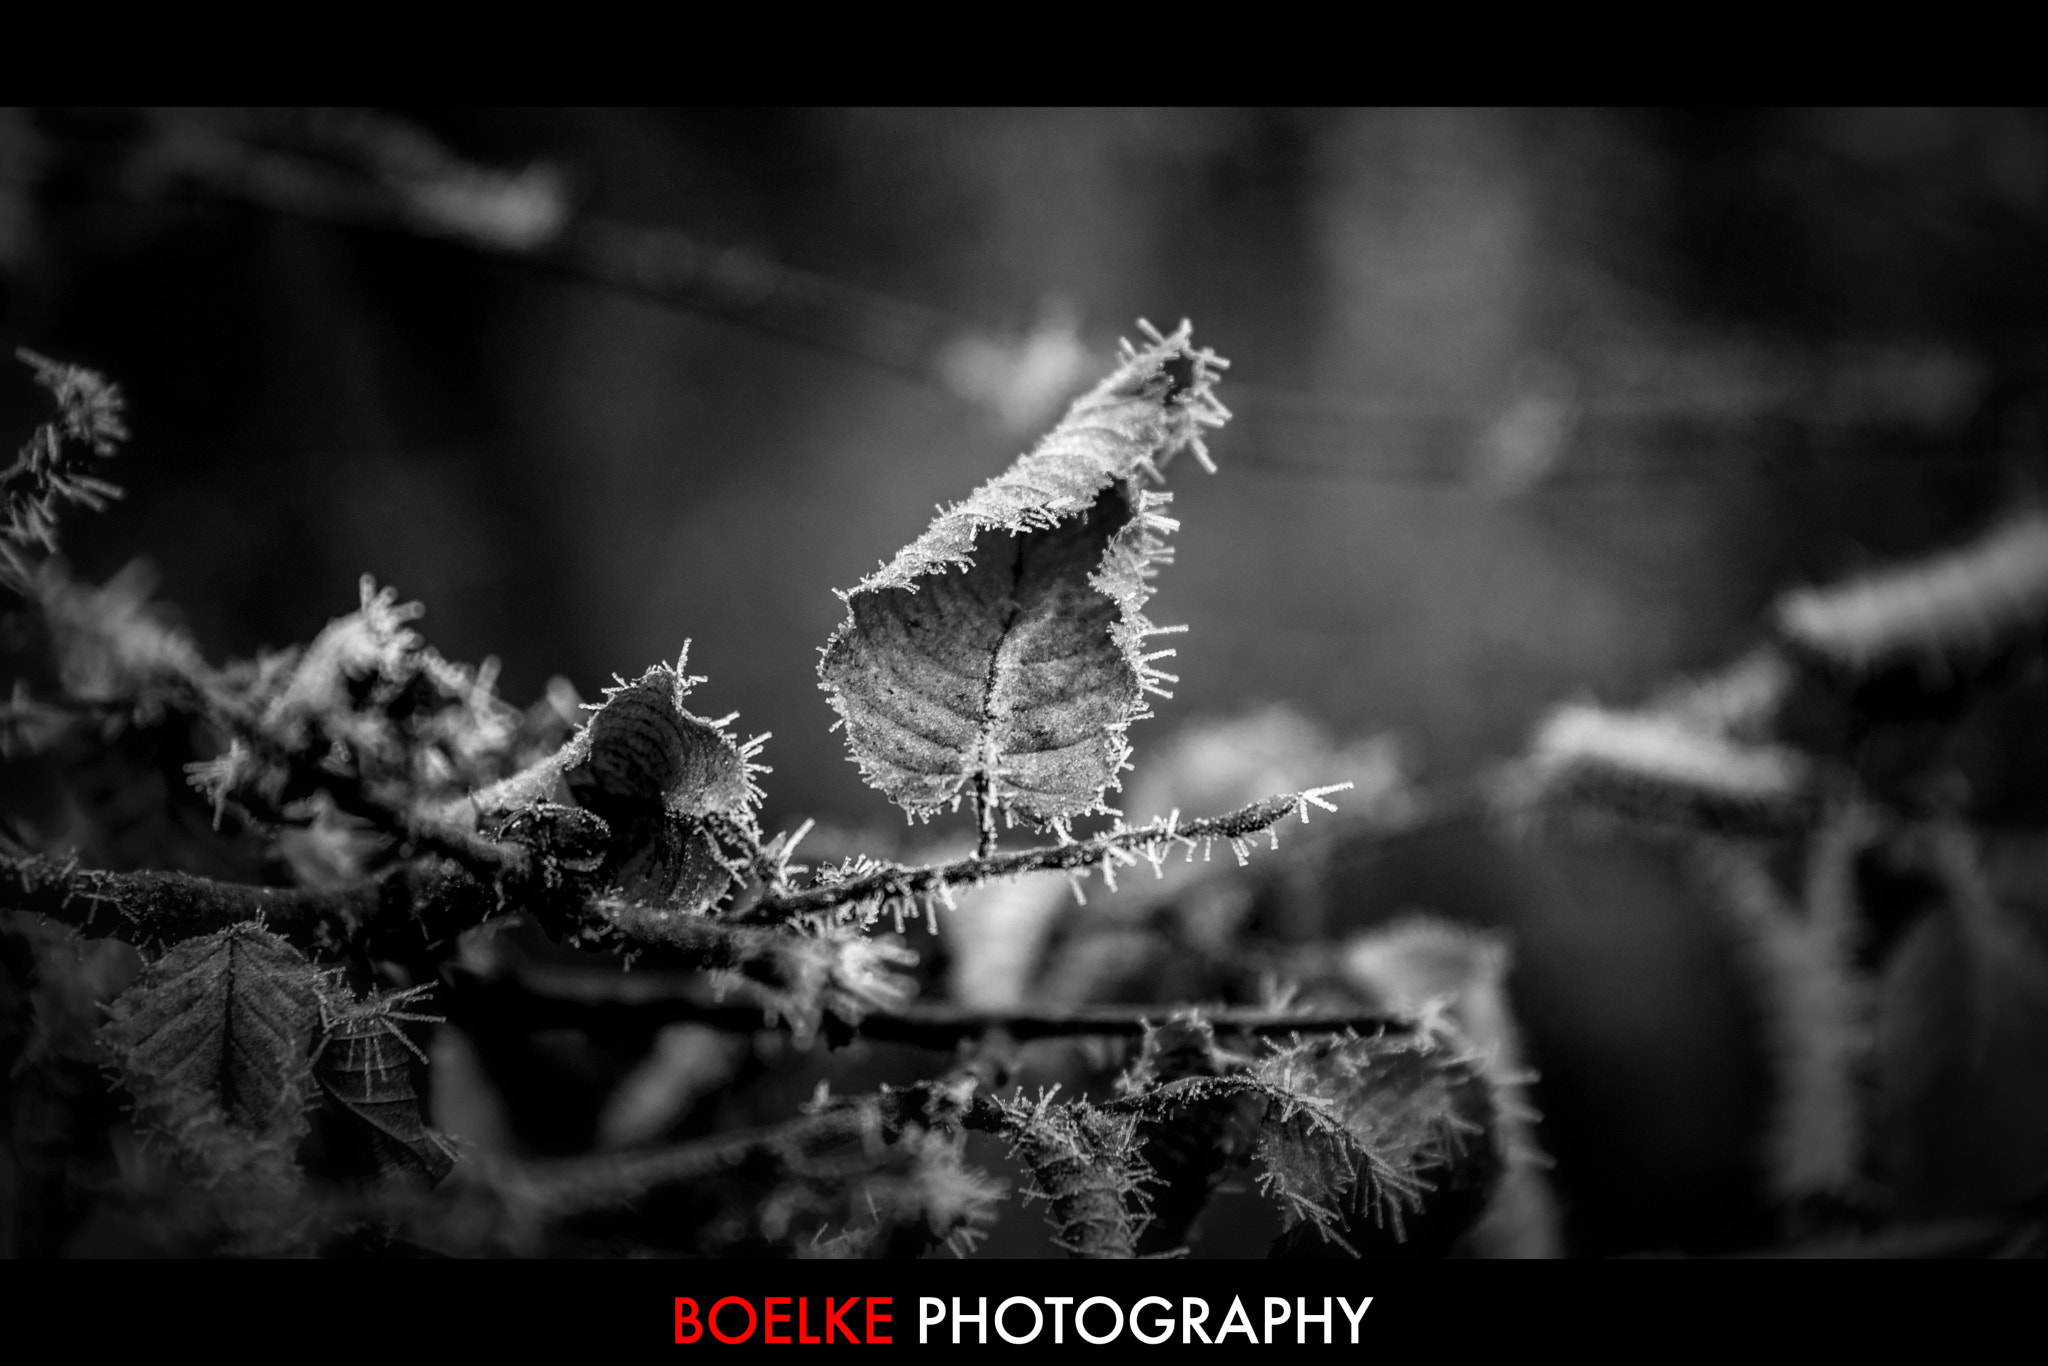 Canon EOS-1Ds Mark III + Sigma 24-105mm f/4 DG OS HSM | A sample photo. Fresh ice photography